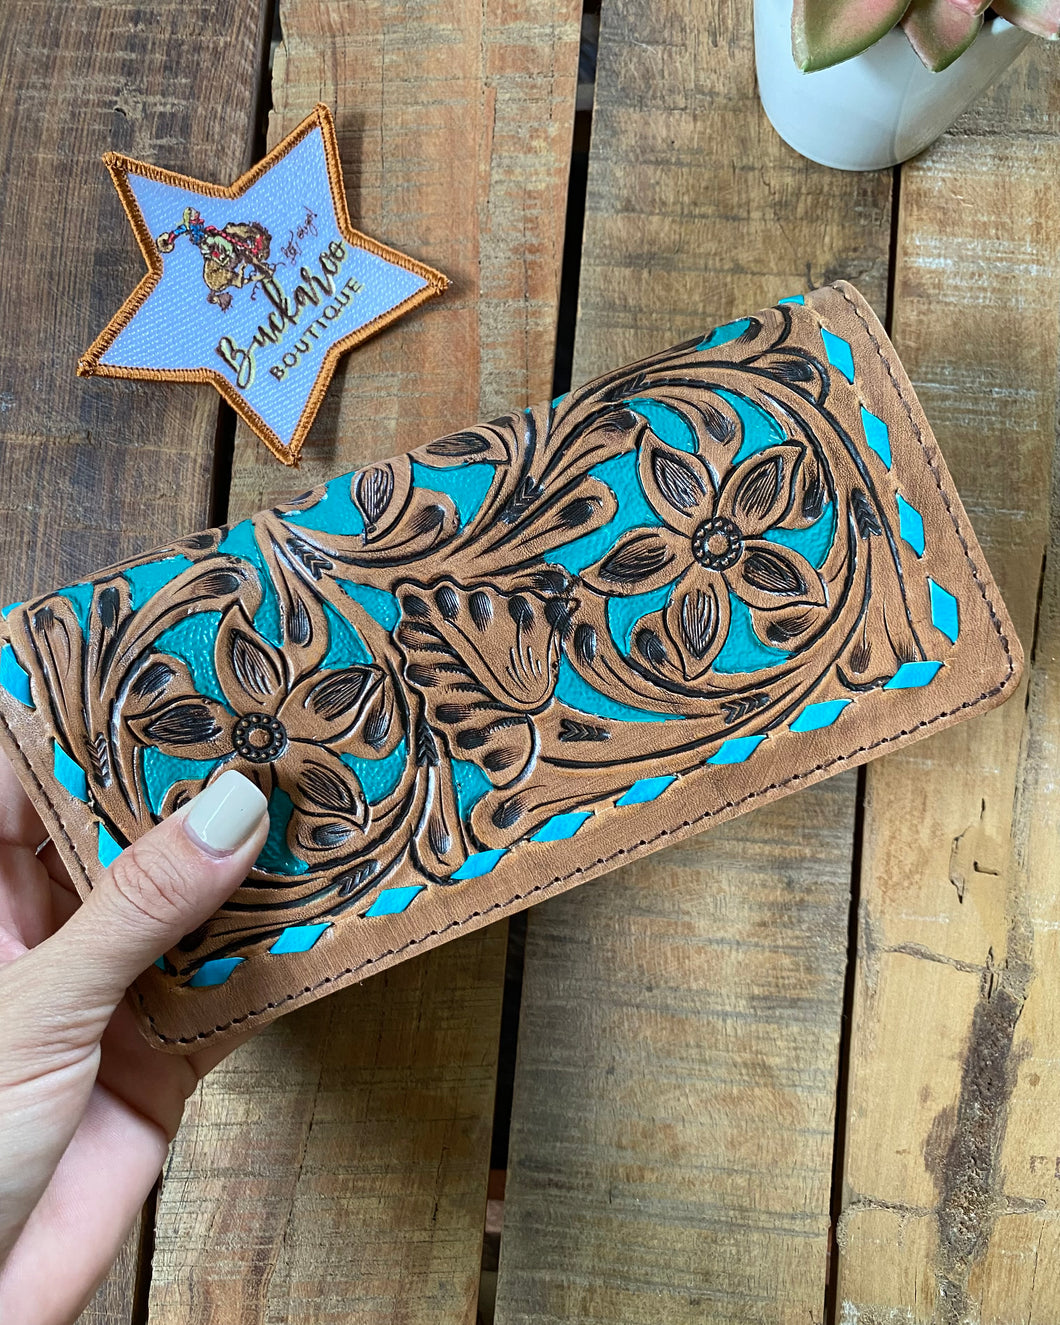 Tooled Leather Wallet W/- Turquoise Colour Buckstitch